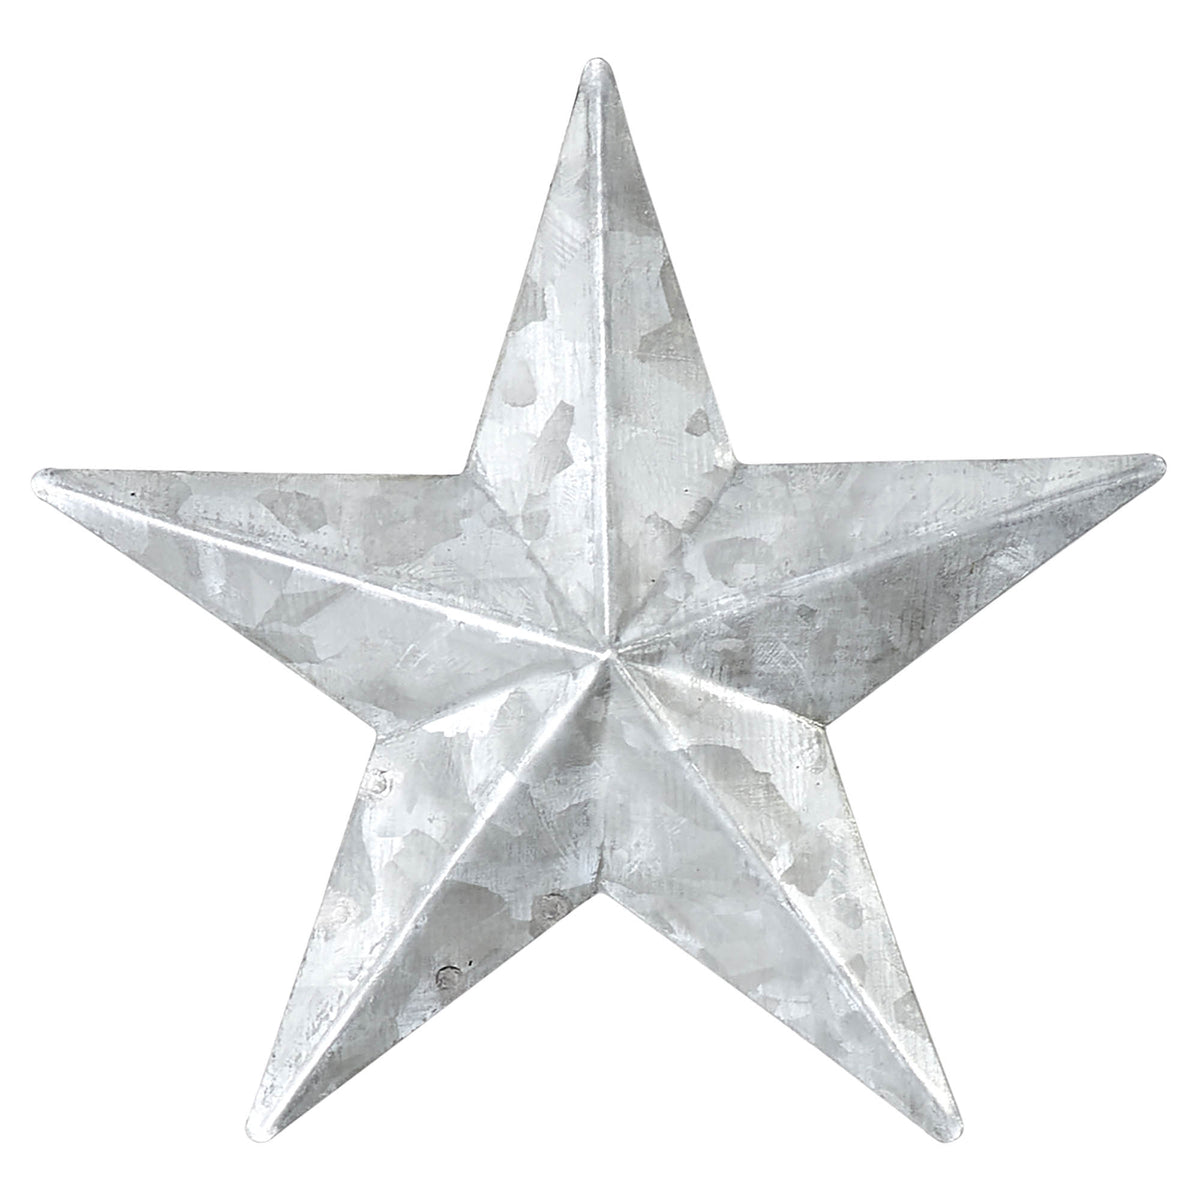 Faceted Metal Star Galvanized Wall Hanging 4x4